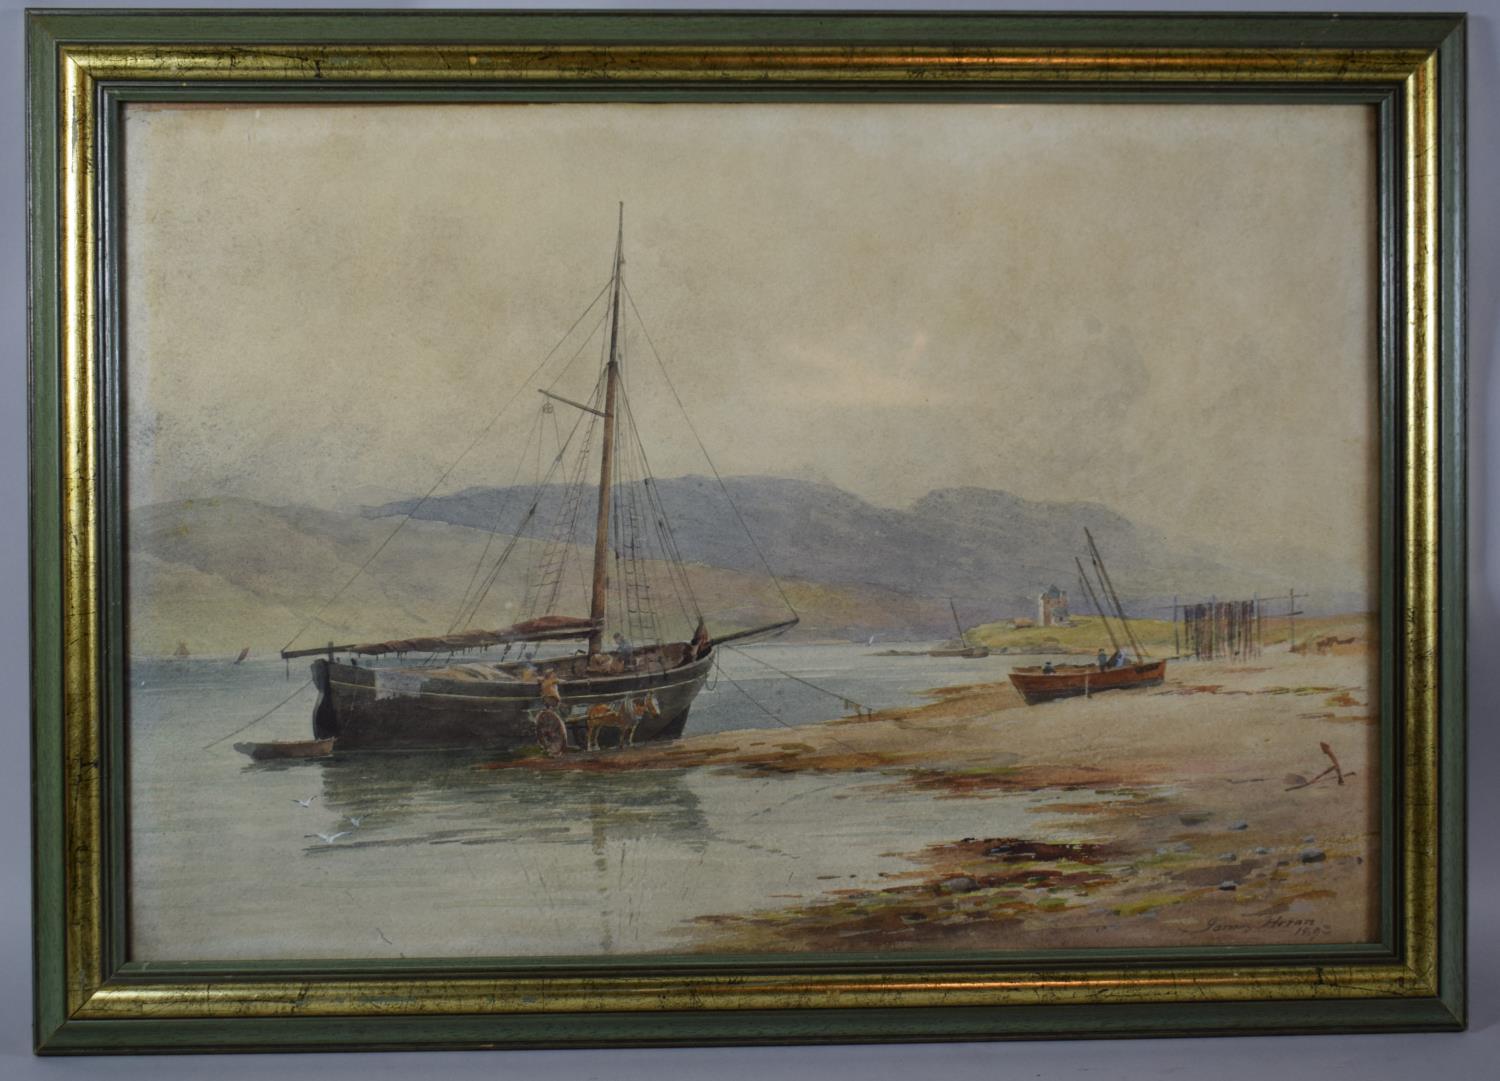 James Heron (1873-1919), Moored Fishing Boats on Loch Gair, Argyleshire, Watercolour, Signed Lower